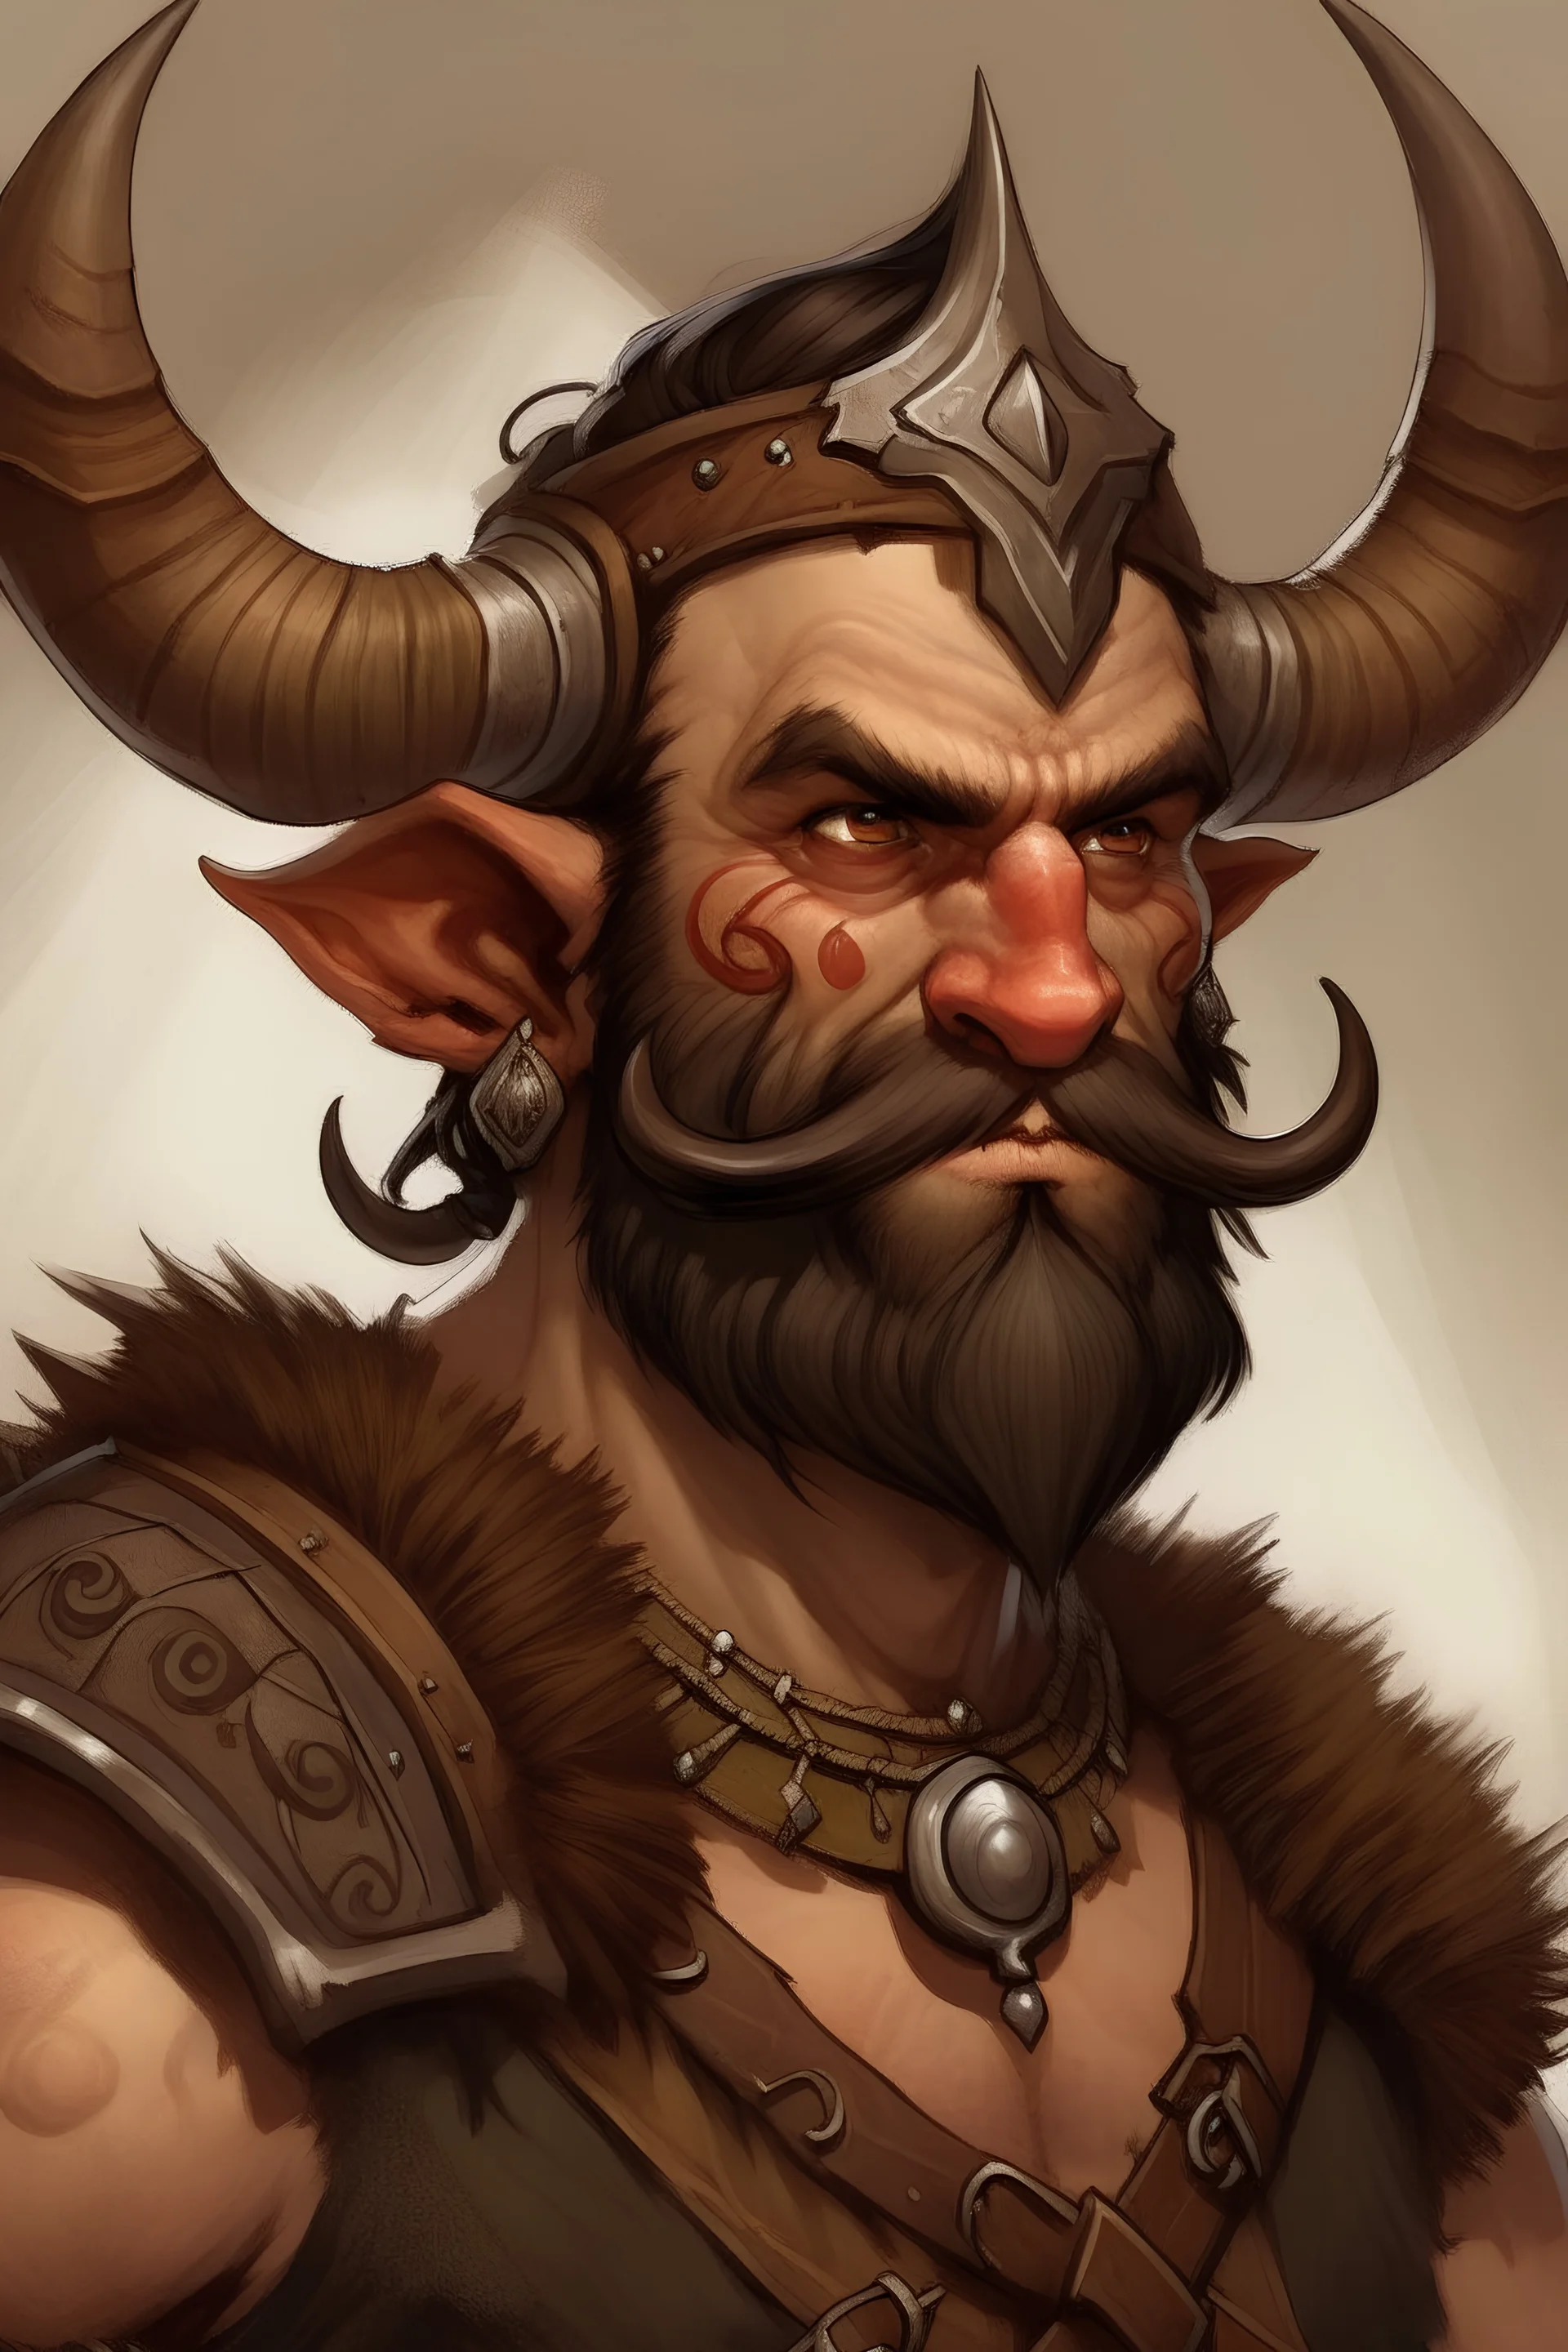 A bestial human barbarian from Dungeons & Dragons with mutton chops.